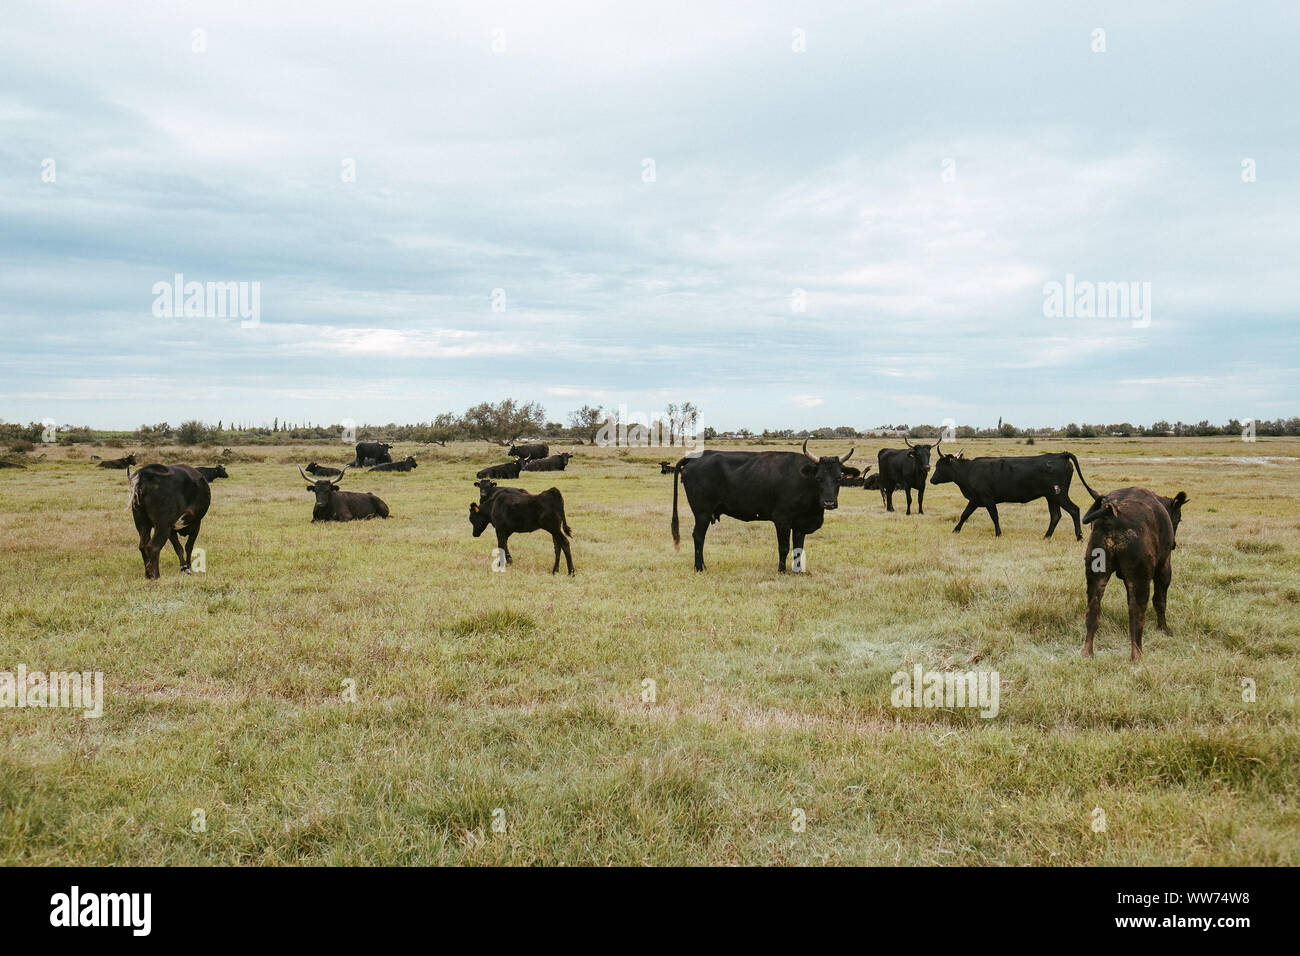 Visiting a bull and horse farm in the Camargue, France Stock Photo